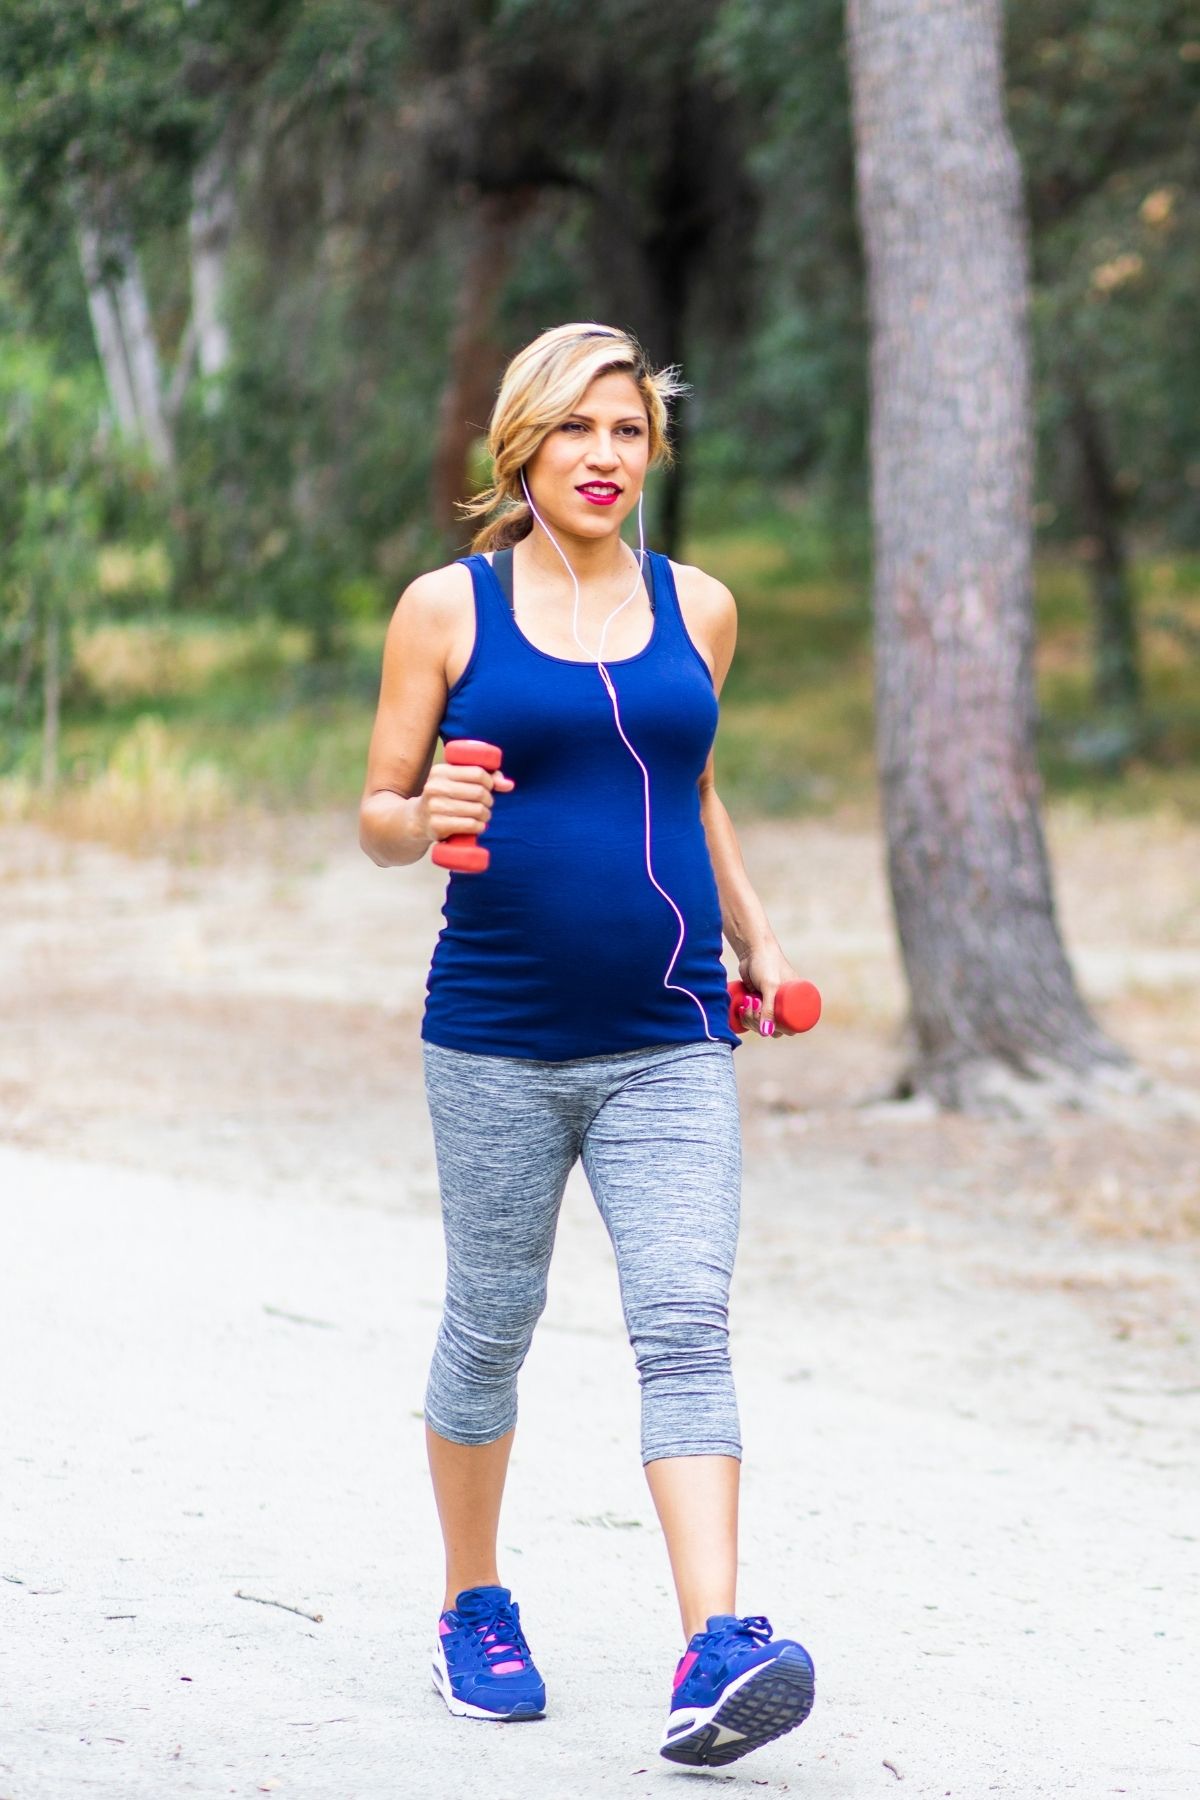 Pregnant woman uses weights and listens to music while walking outside.